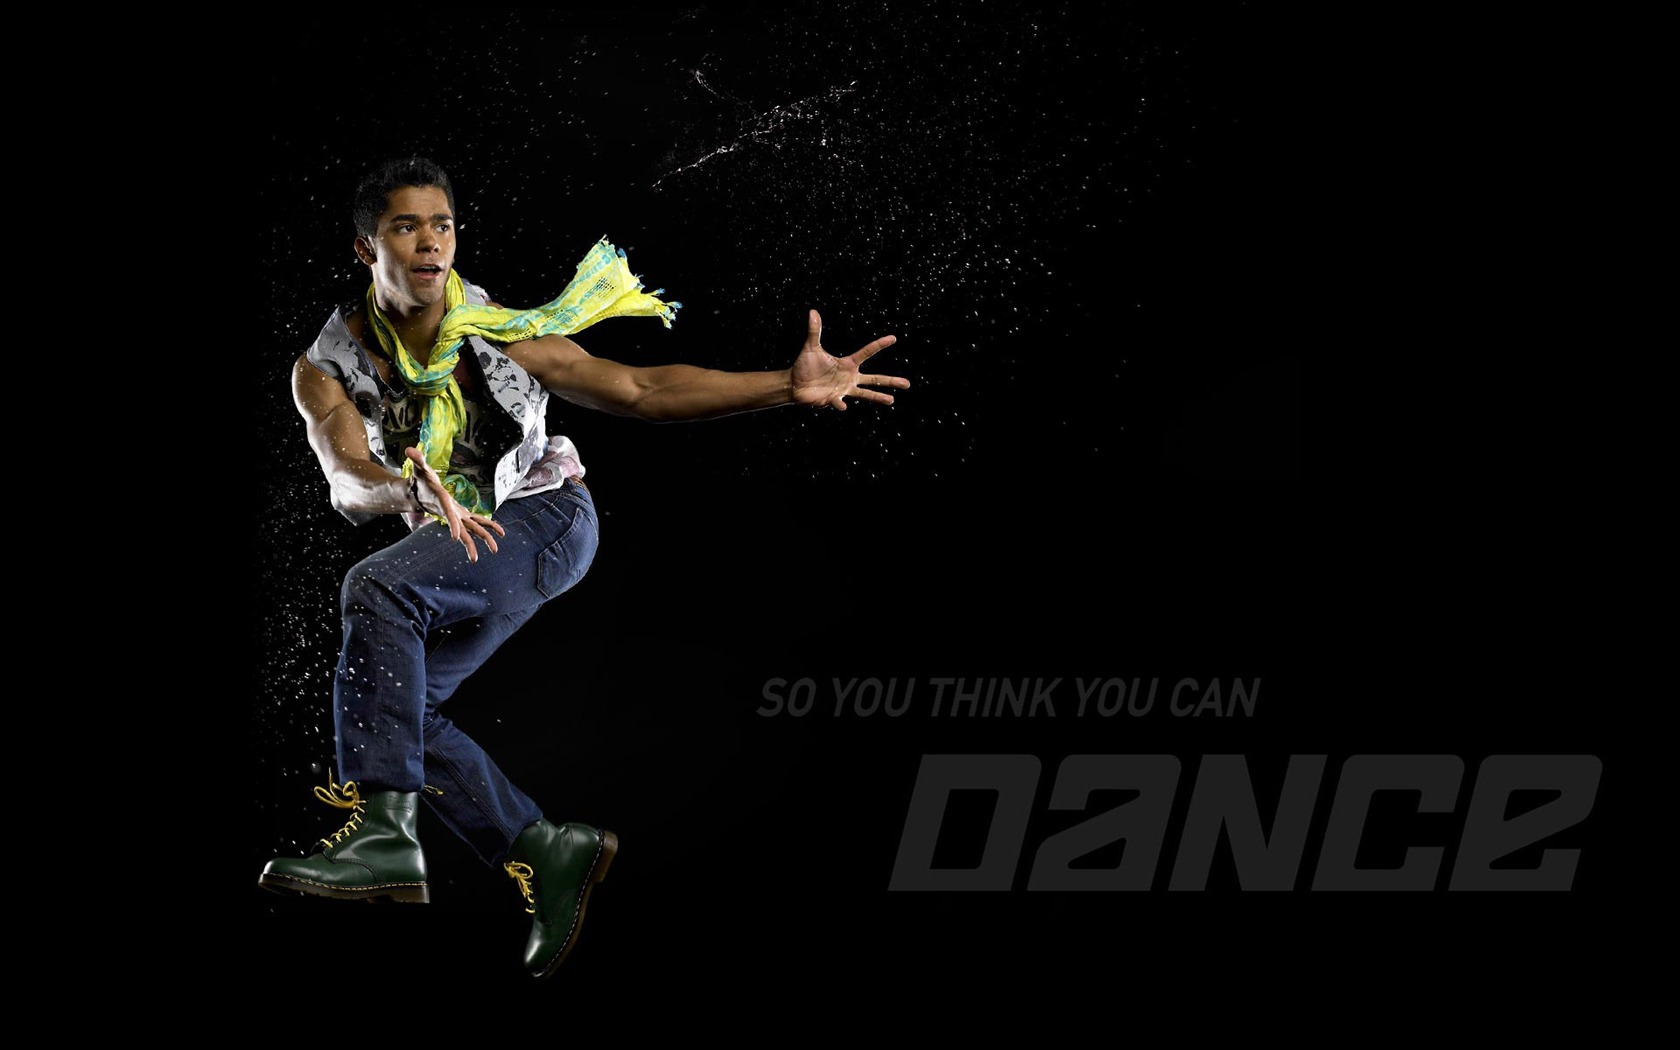 So You Think You Can Dance 舞林争霸 壁纸(一)2 - 1680x1050